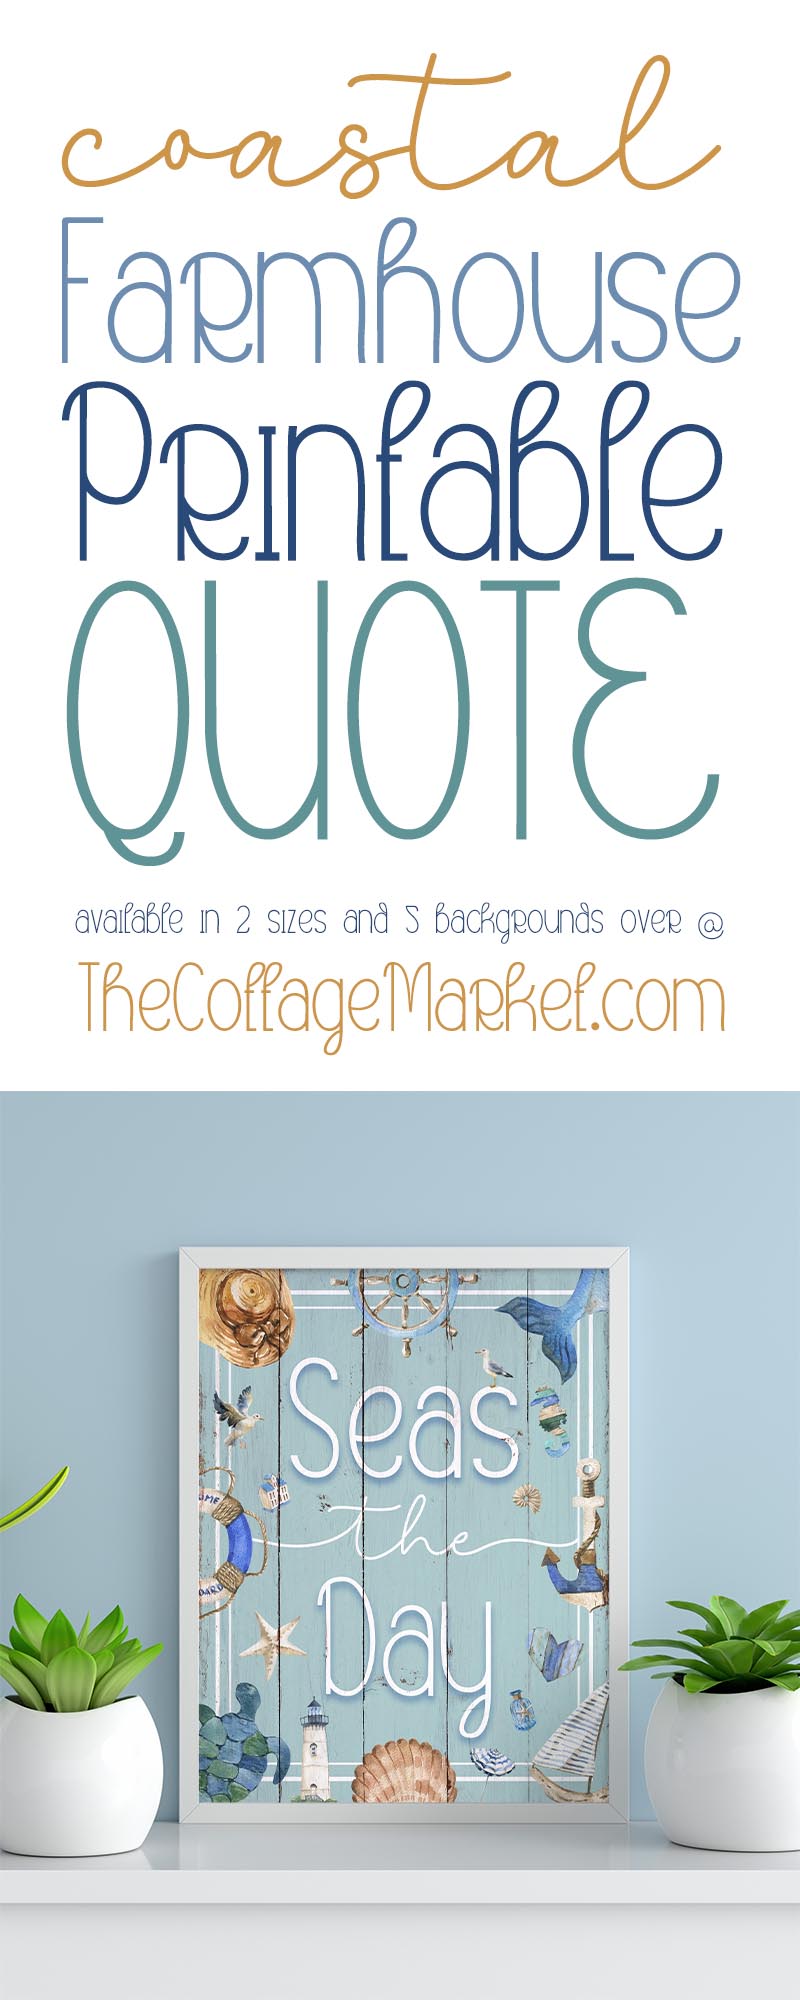 This Farmhouse Coastal Farmhouse Printable Quote is a perfect addition to your space. A little touch of very needed tranquility!